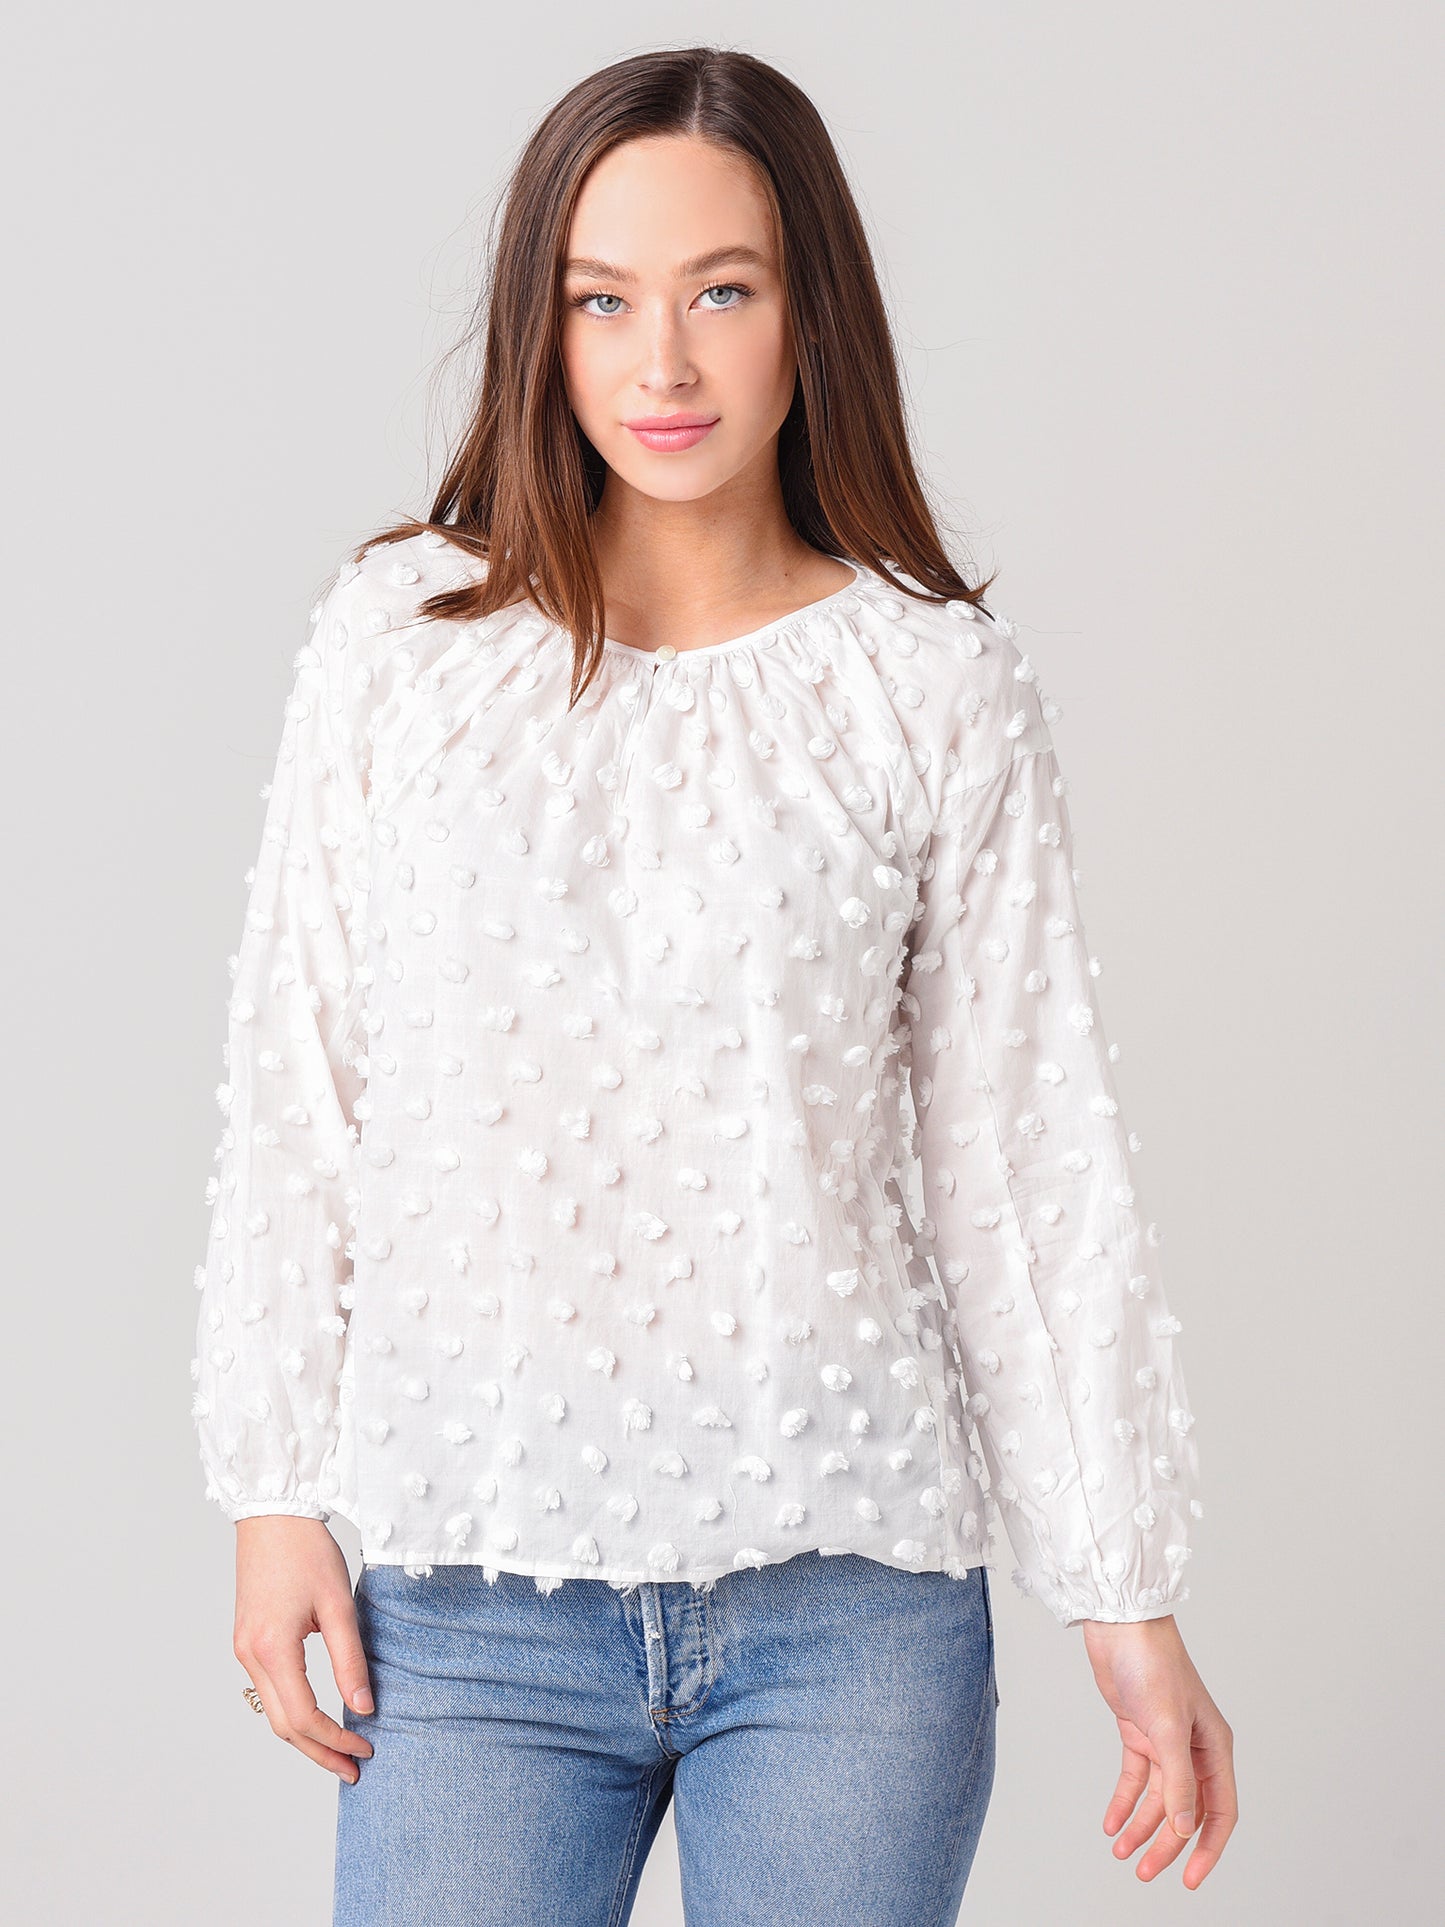 Dylan Women's Bella Blouse With Fuzzy Dots